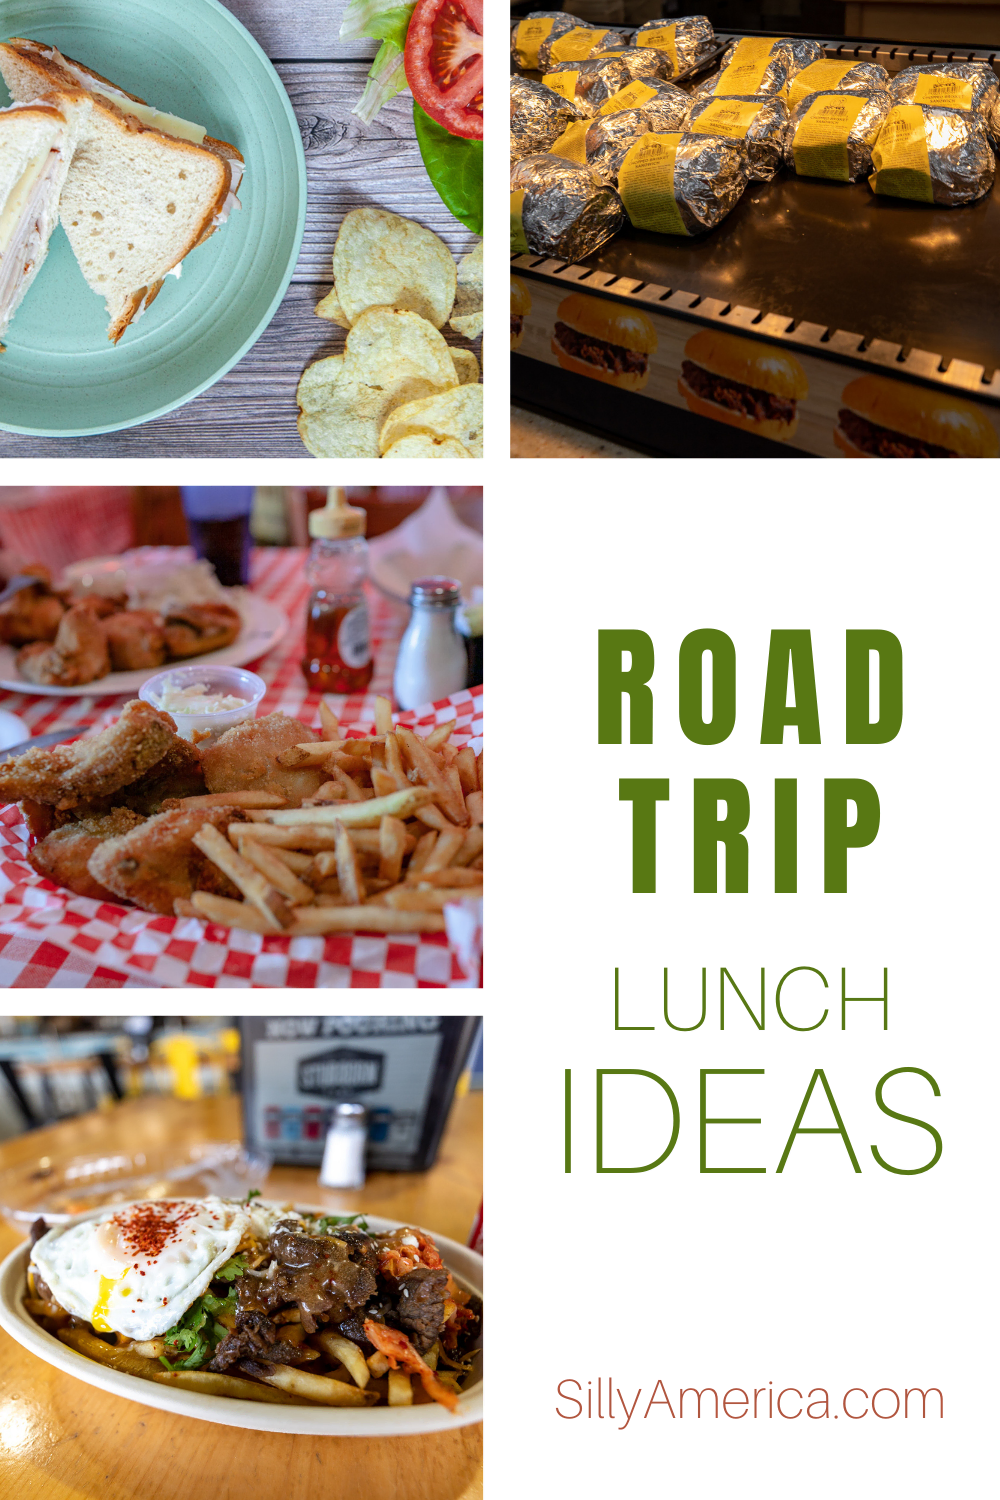 Let's do lunch! A good road trip lunch will give you the fuel you need to keep going on your day's journey and keep you satisfied as you trek on. It also, often, gives you the chance to try something new and local. So what are some good road trip lunch ideas? Whether you want grab and go fast food in the car, to try out a local delicacy at a diner or restaurant, or want recipes to make ahead, the best road trip lunch is the one you're eating today. #RoadTrip #RoadTripLunch #RoadTripFood